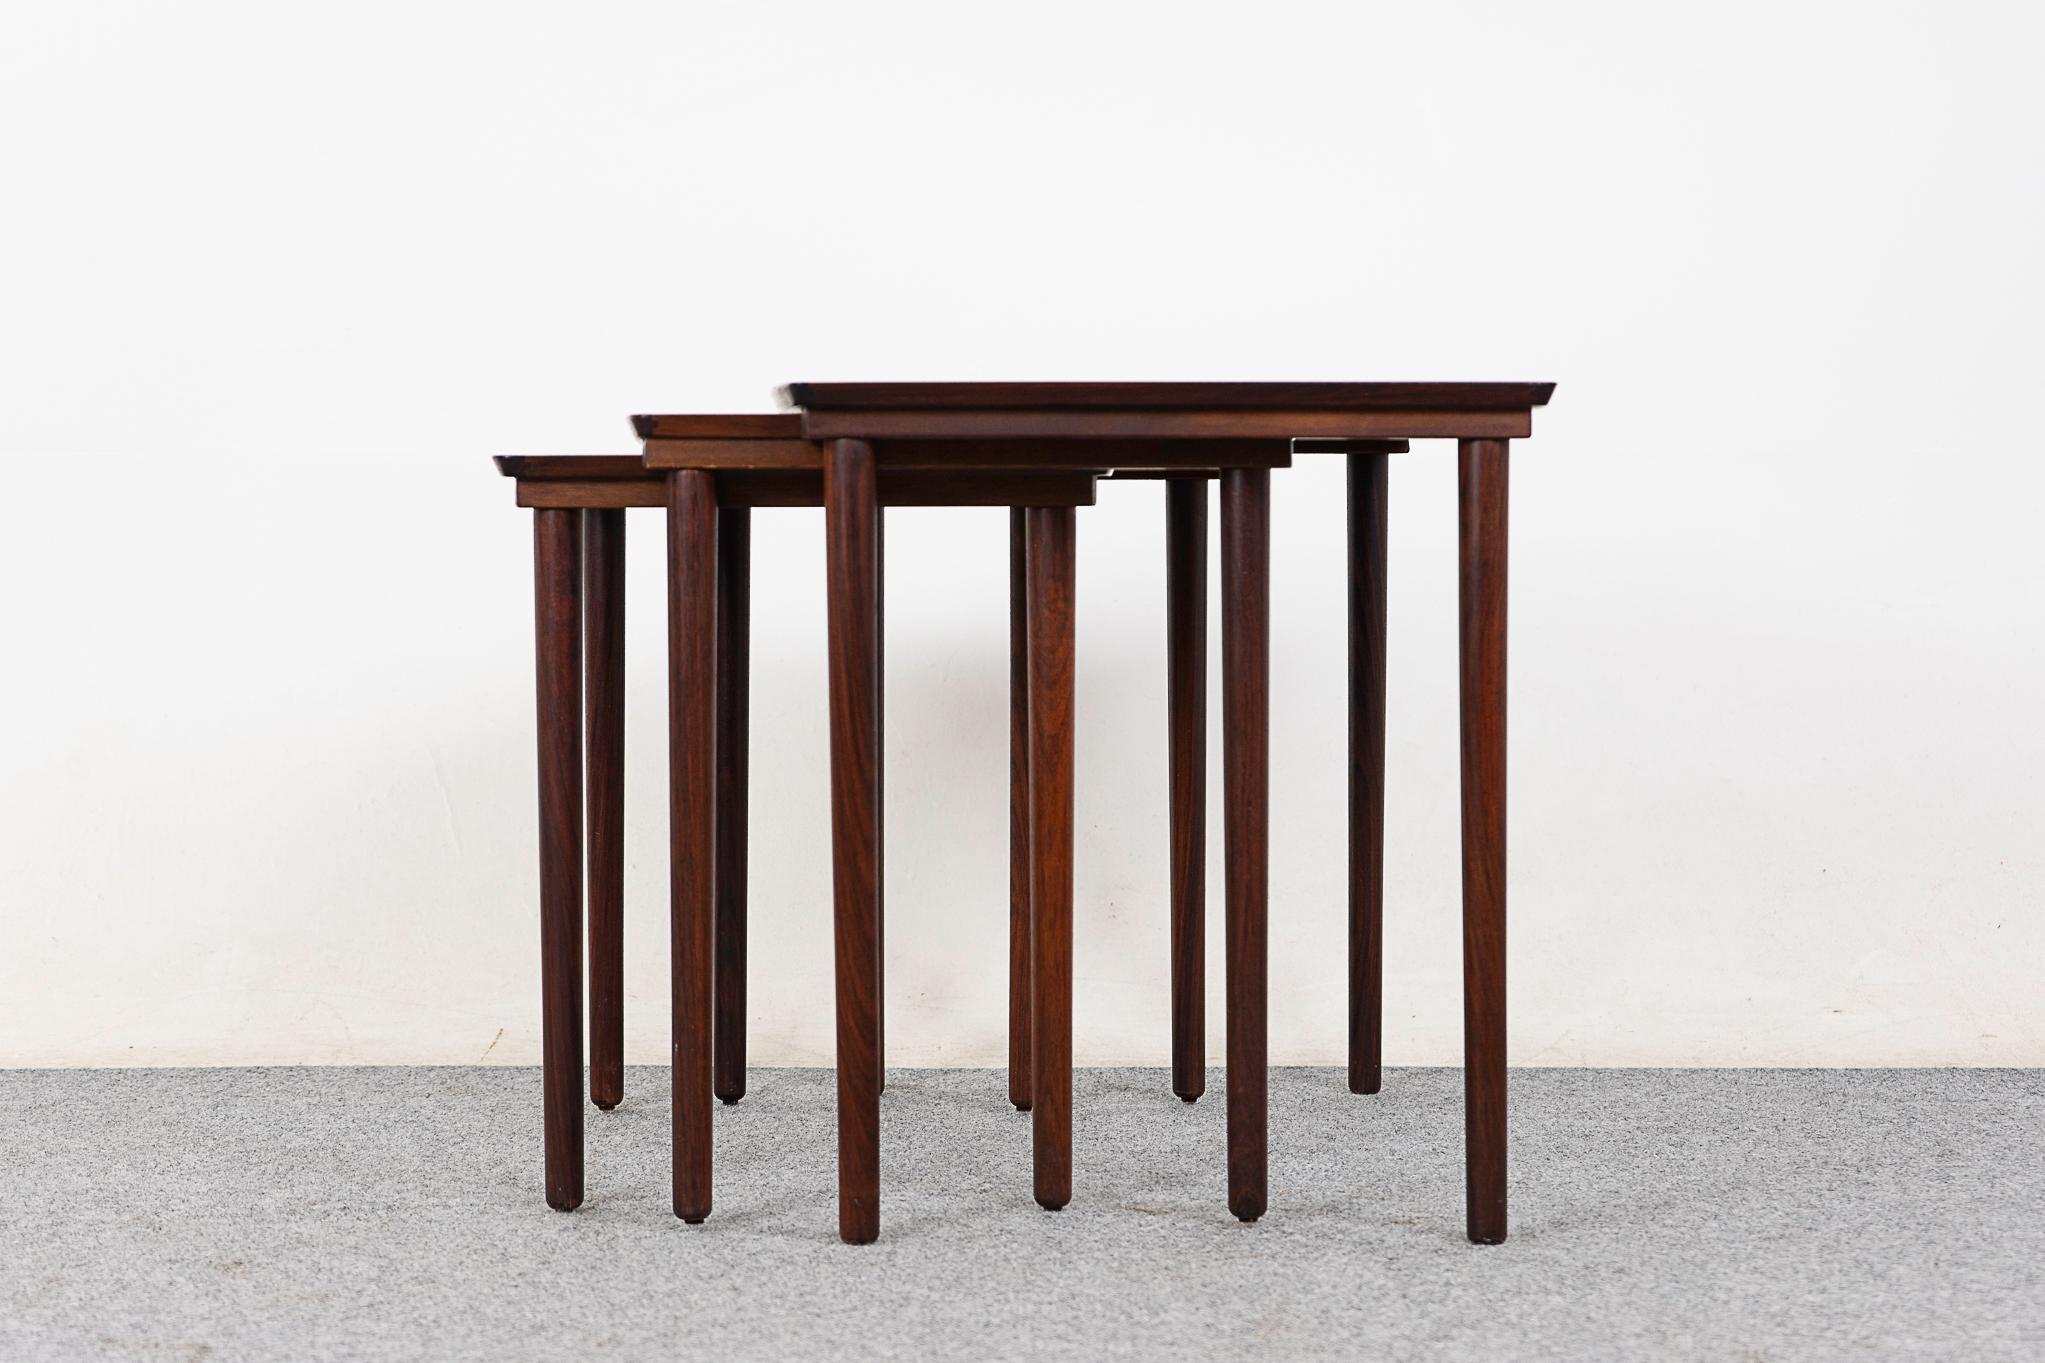 Danish Mid-Centruy Modern Rosewood Nesting Tables by Mobelintarsia For Sale 1